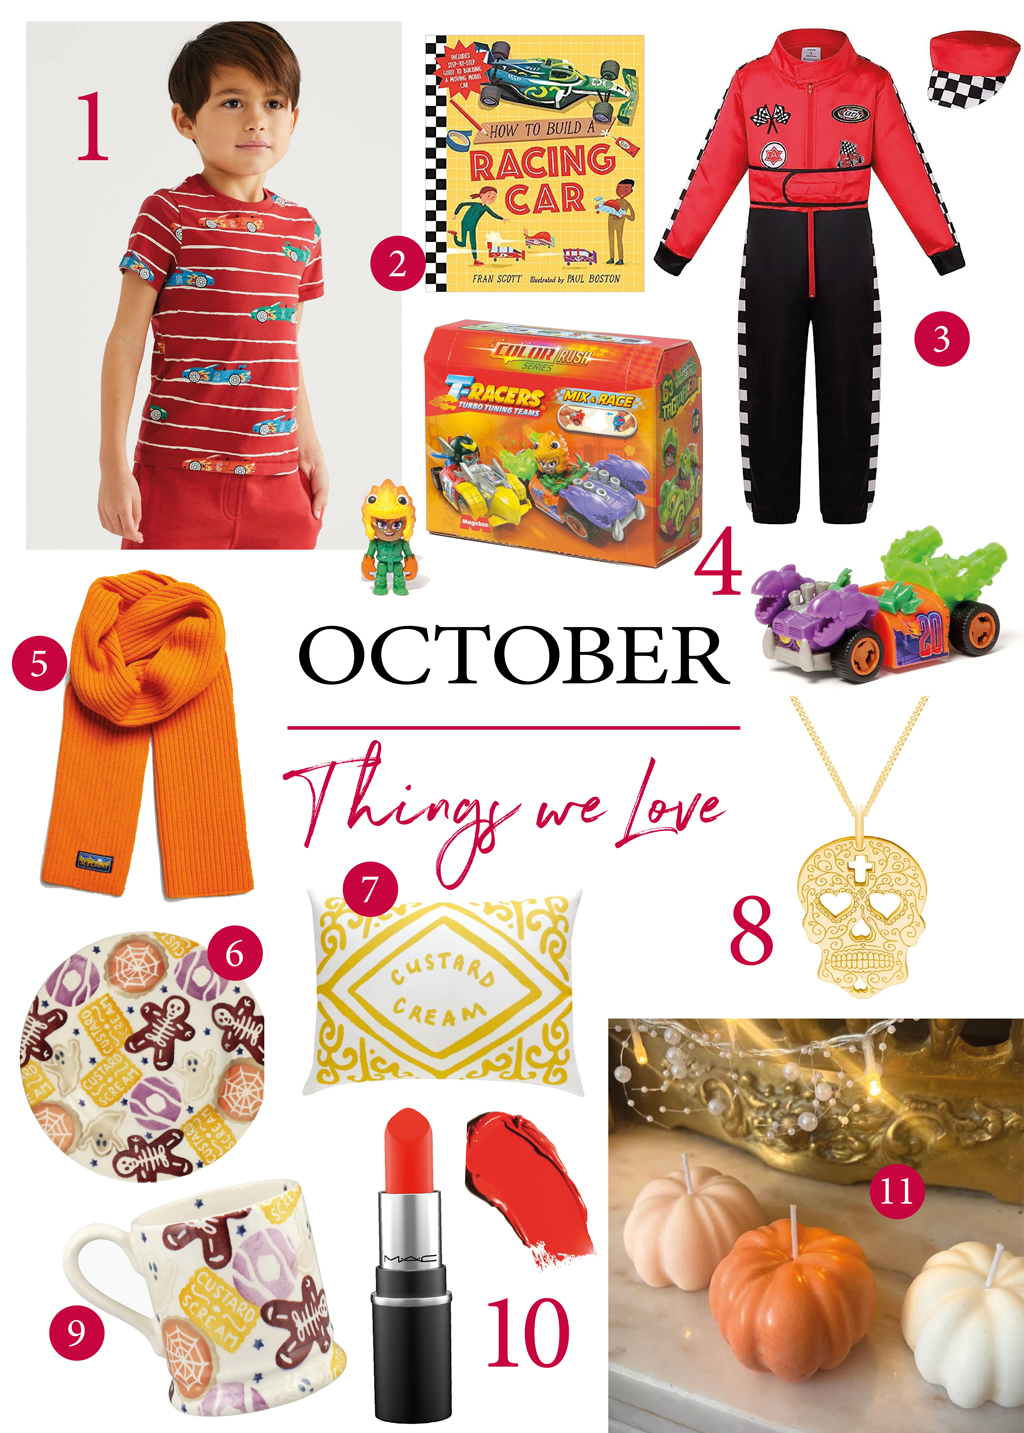 We bring you a gently Halloween-inspired 'This Month We Love October'. Including brand new Colour Rush T Racers for racing car-mad kids!